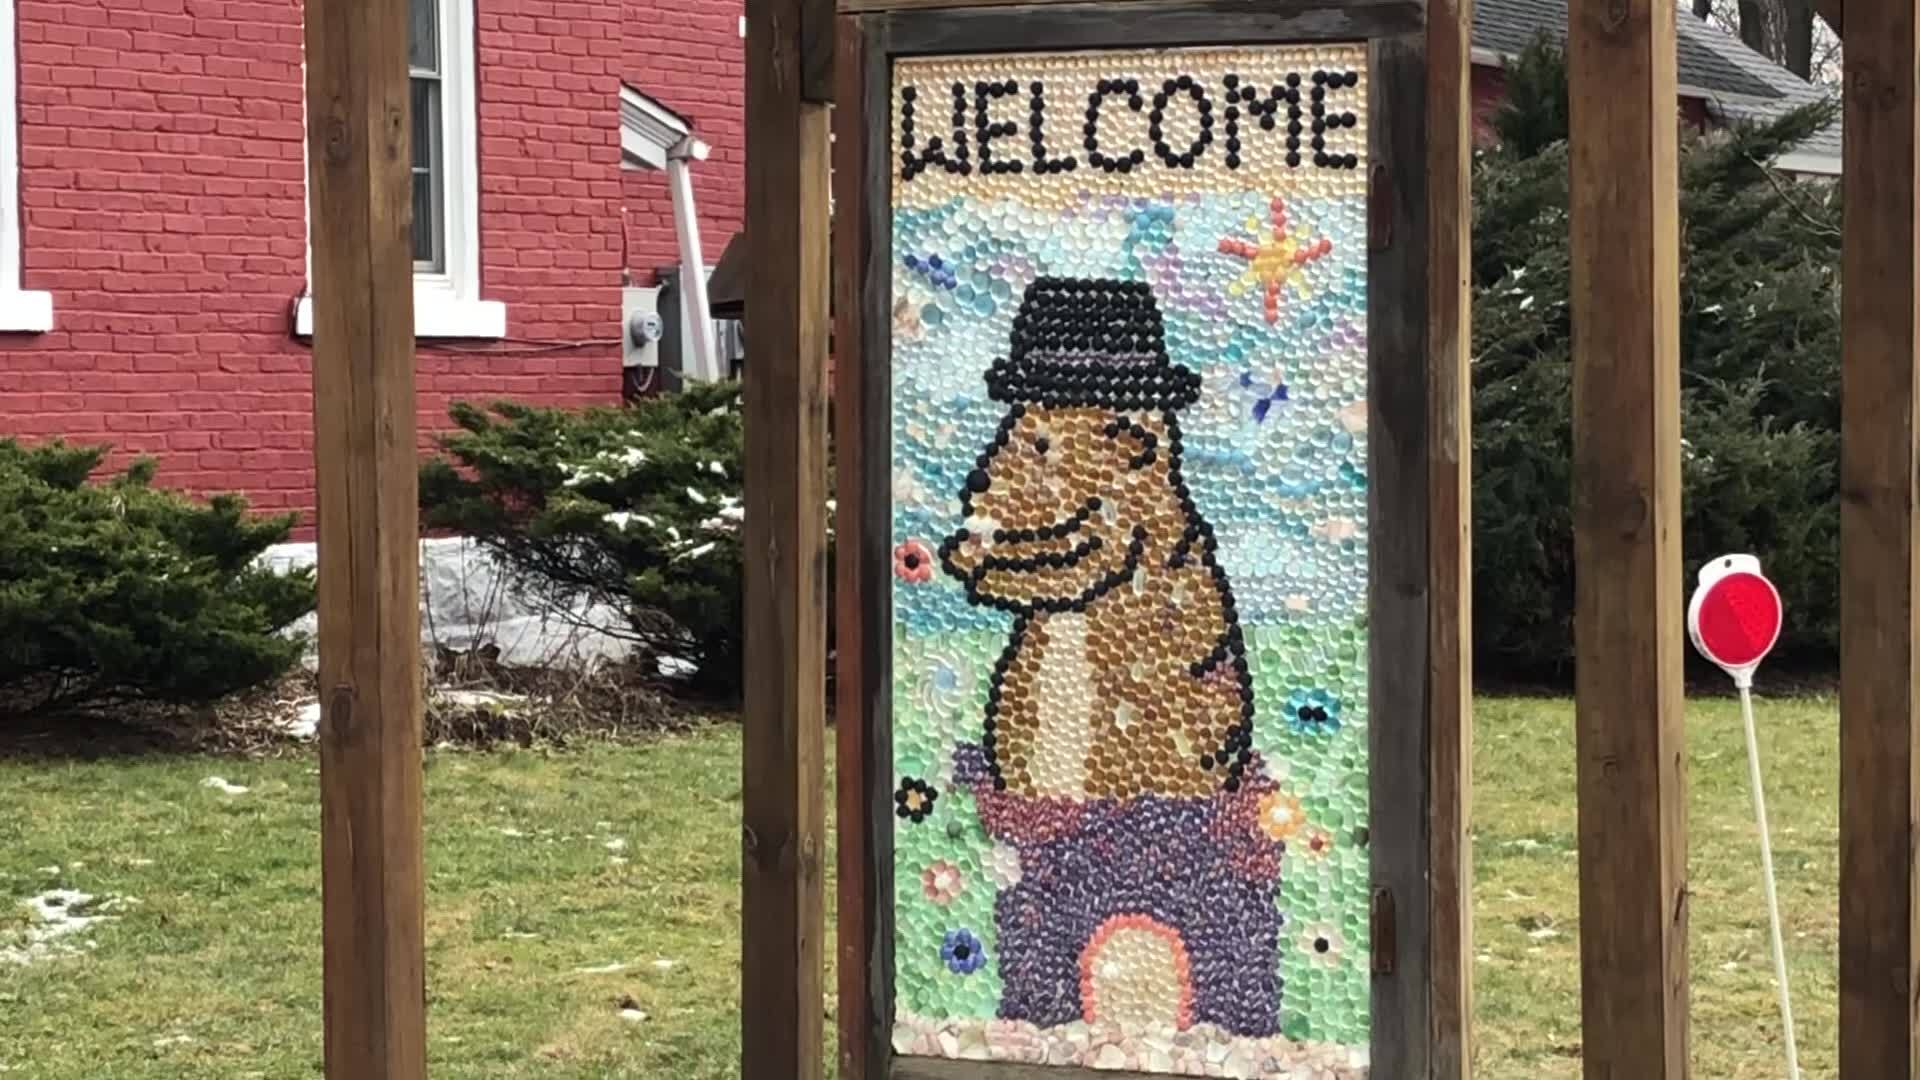 Punxsutawney Weather Discovery Center gears up for Groundhog